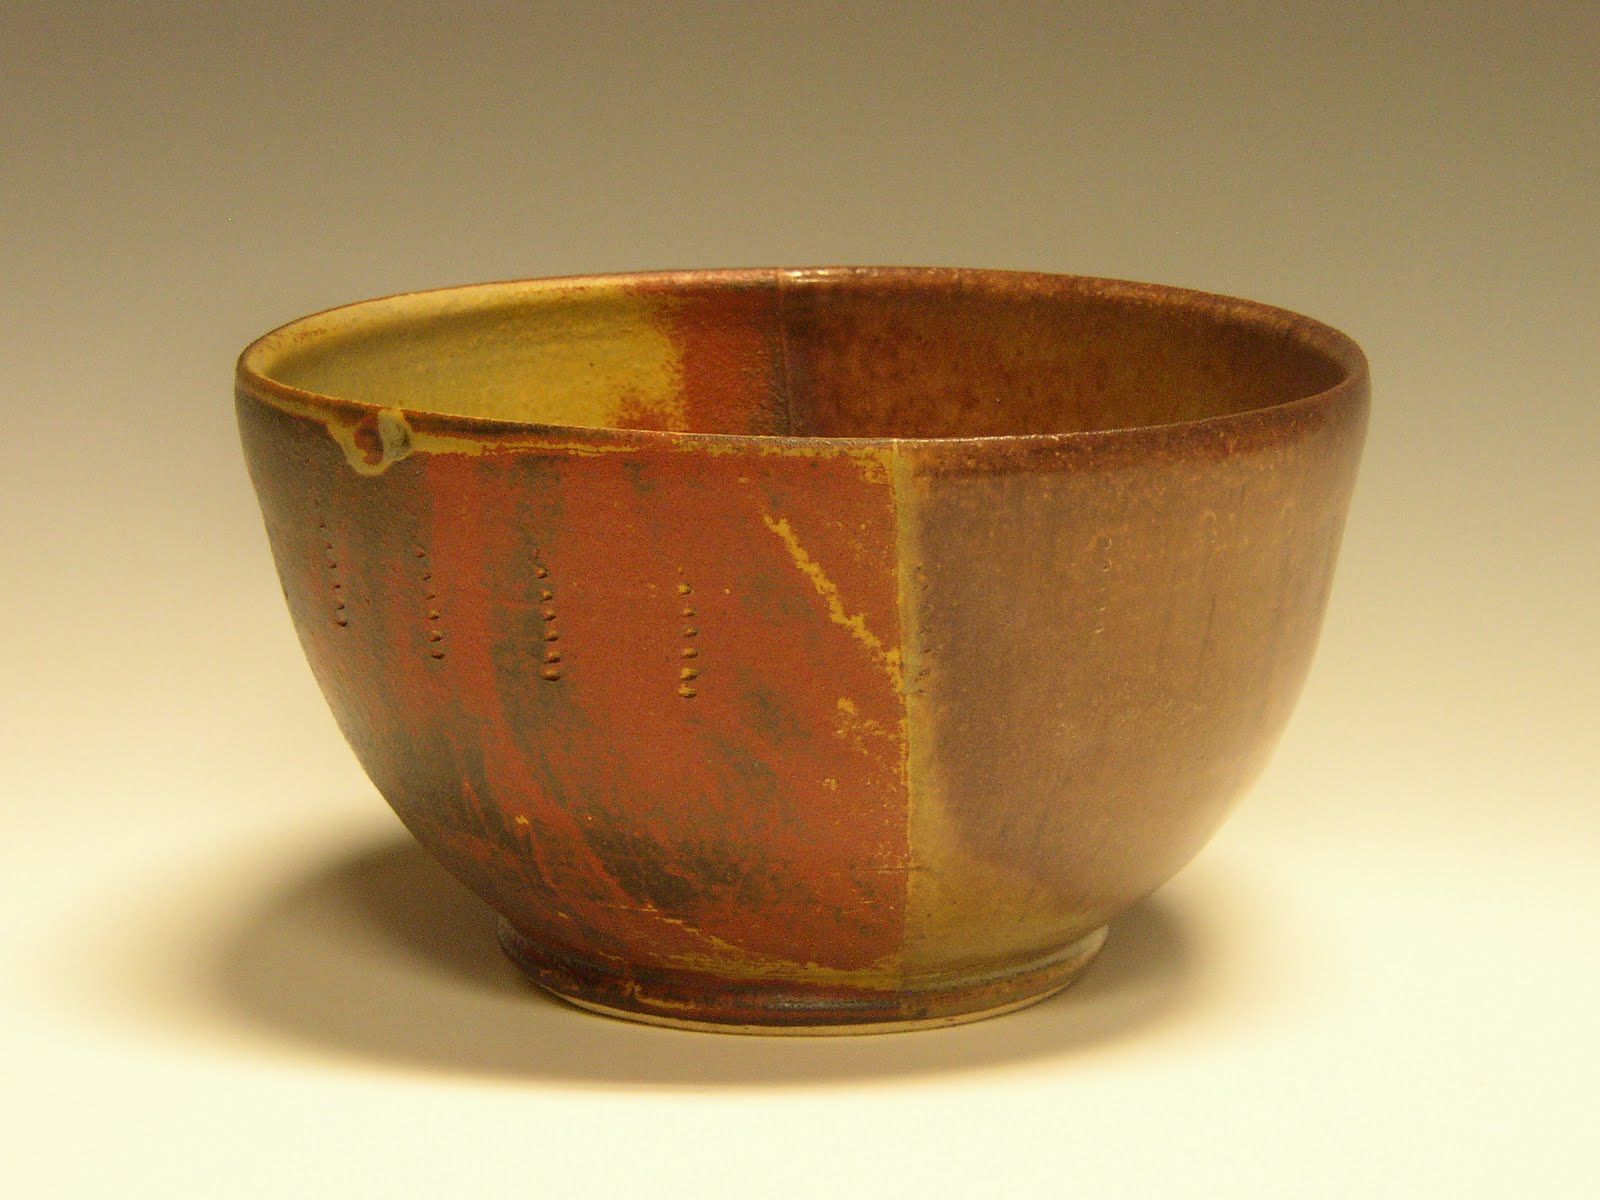 Classes — Claymakers